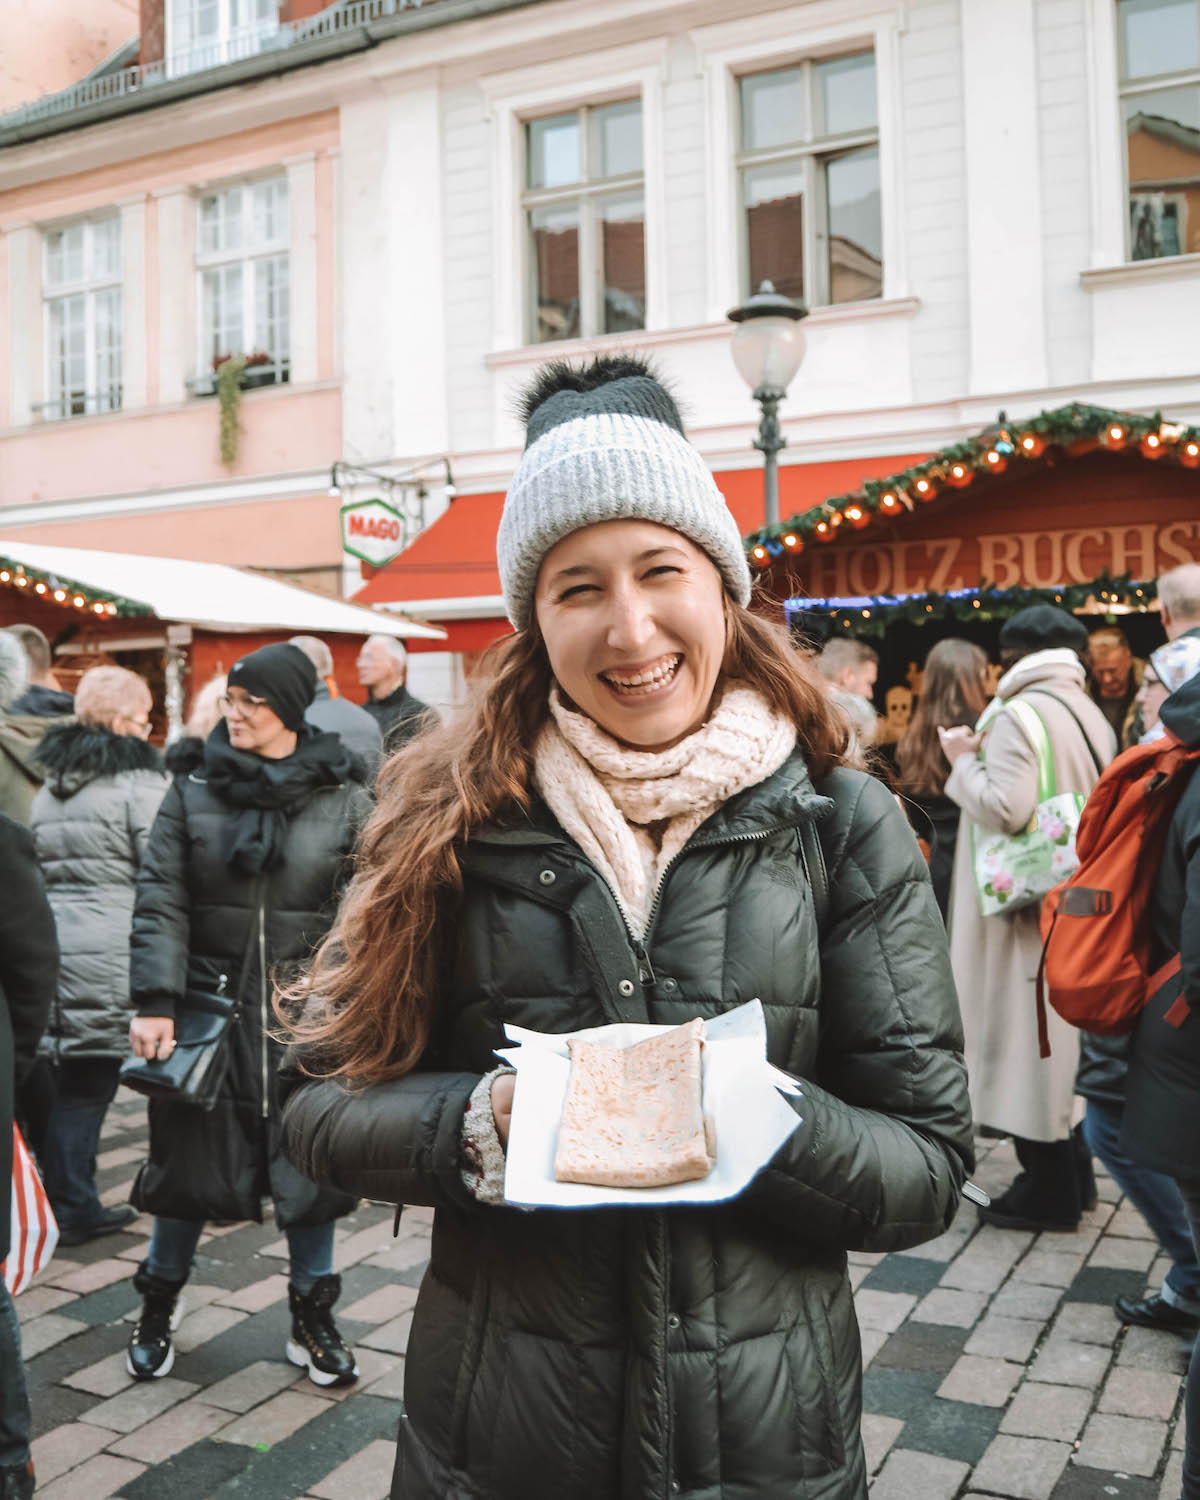 Woman holding crepe and smiling at a Christmas market.